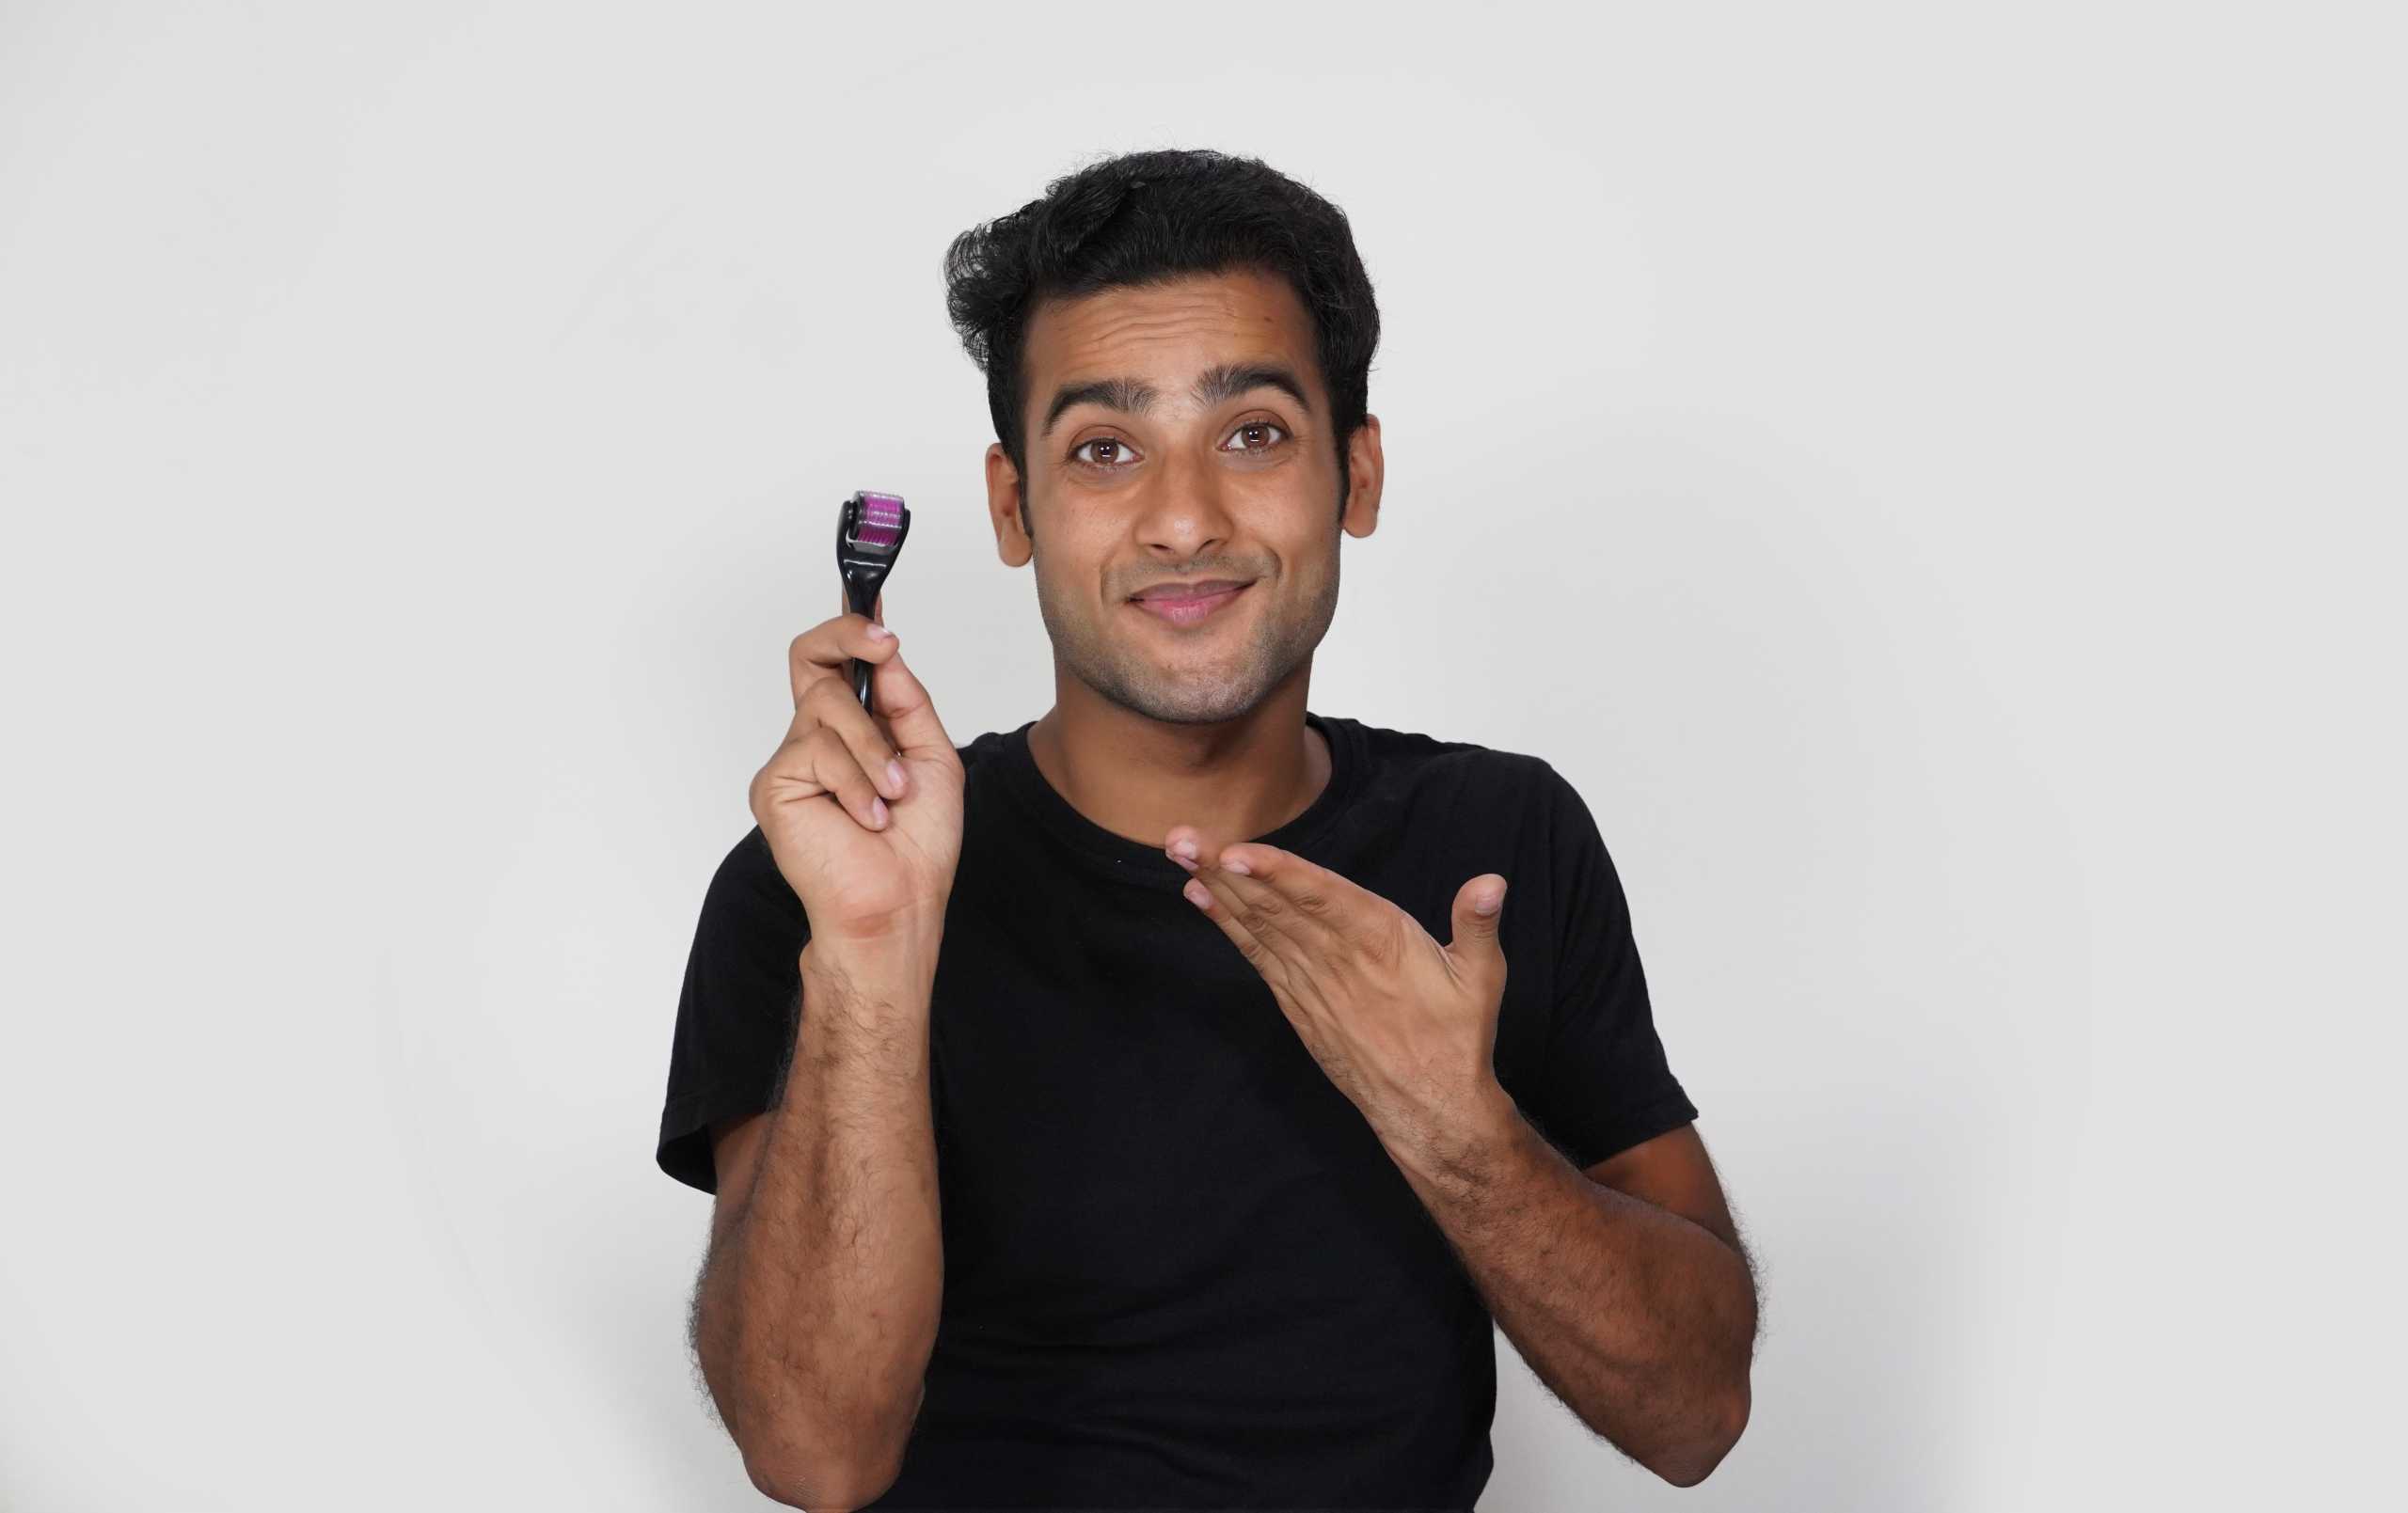 A man having using derma roller and he is happy and exited for hair growth